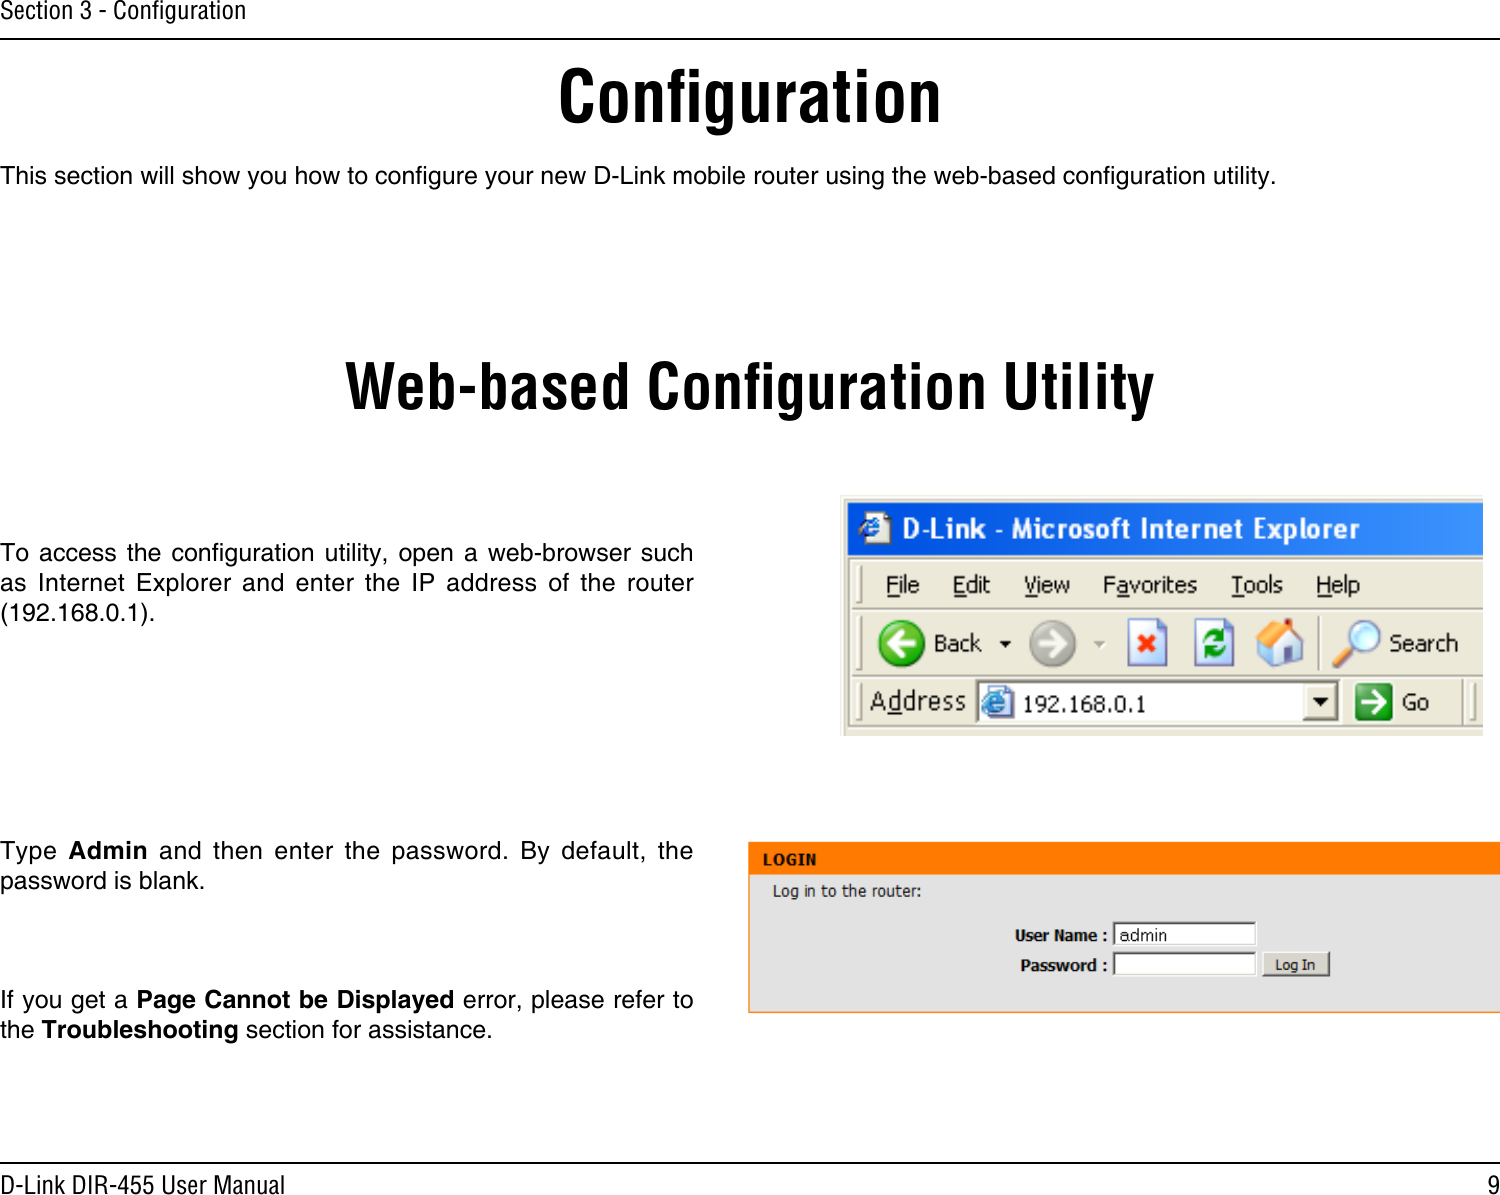 9D-Link DIR-455 User ManualSection 3 - ConﬁgurationConﬁgurationThis section will show you how to congure your new D-Link mobile router using the web-based conguration utility.Web-based Conﬁguration UtilityTo access  the conguration  utility,  open  a  web-browser  such as  Internet  Explorer  and  enter  the  IP  address  of  the  router (192.168.0.1).Type  Admin  and  then  enter  the  password.  By  default,  the password is blank.If you get a Page Cannot be Displayed error, please refer to the Troubleshooting section for assistance.